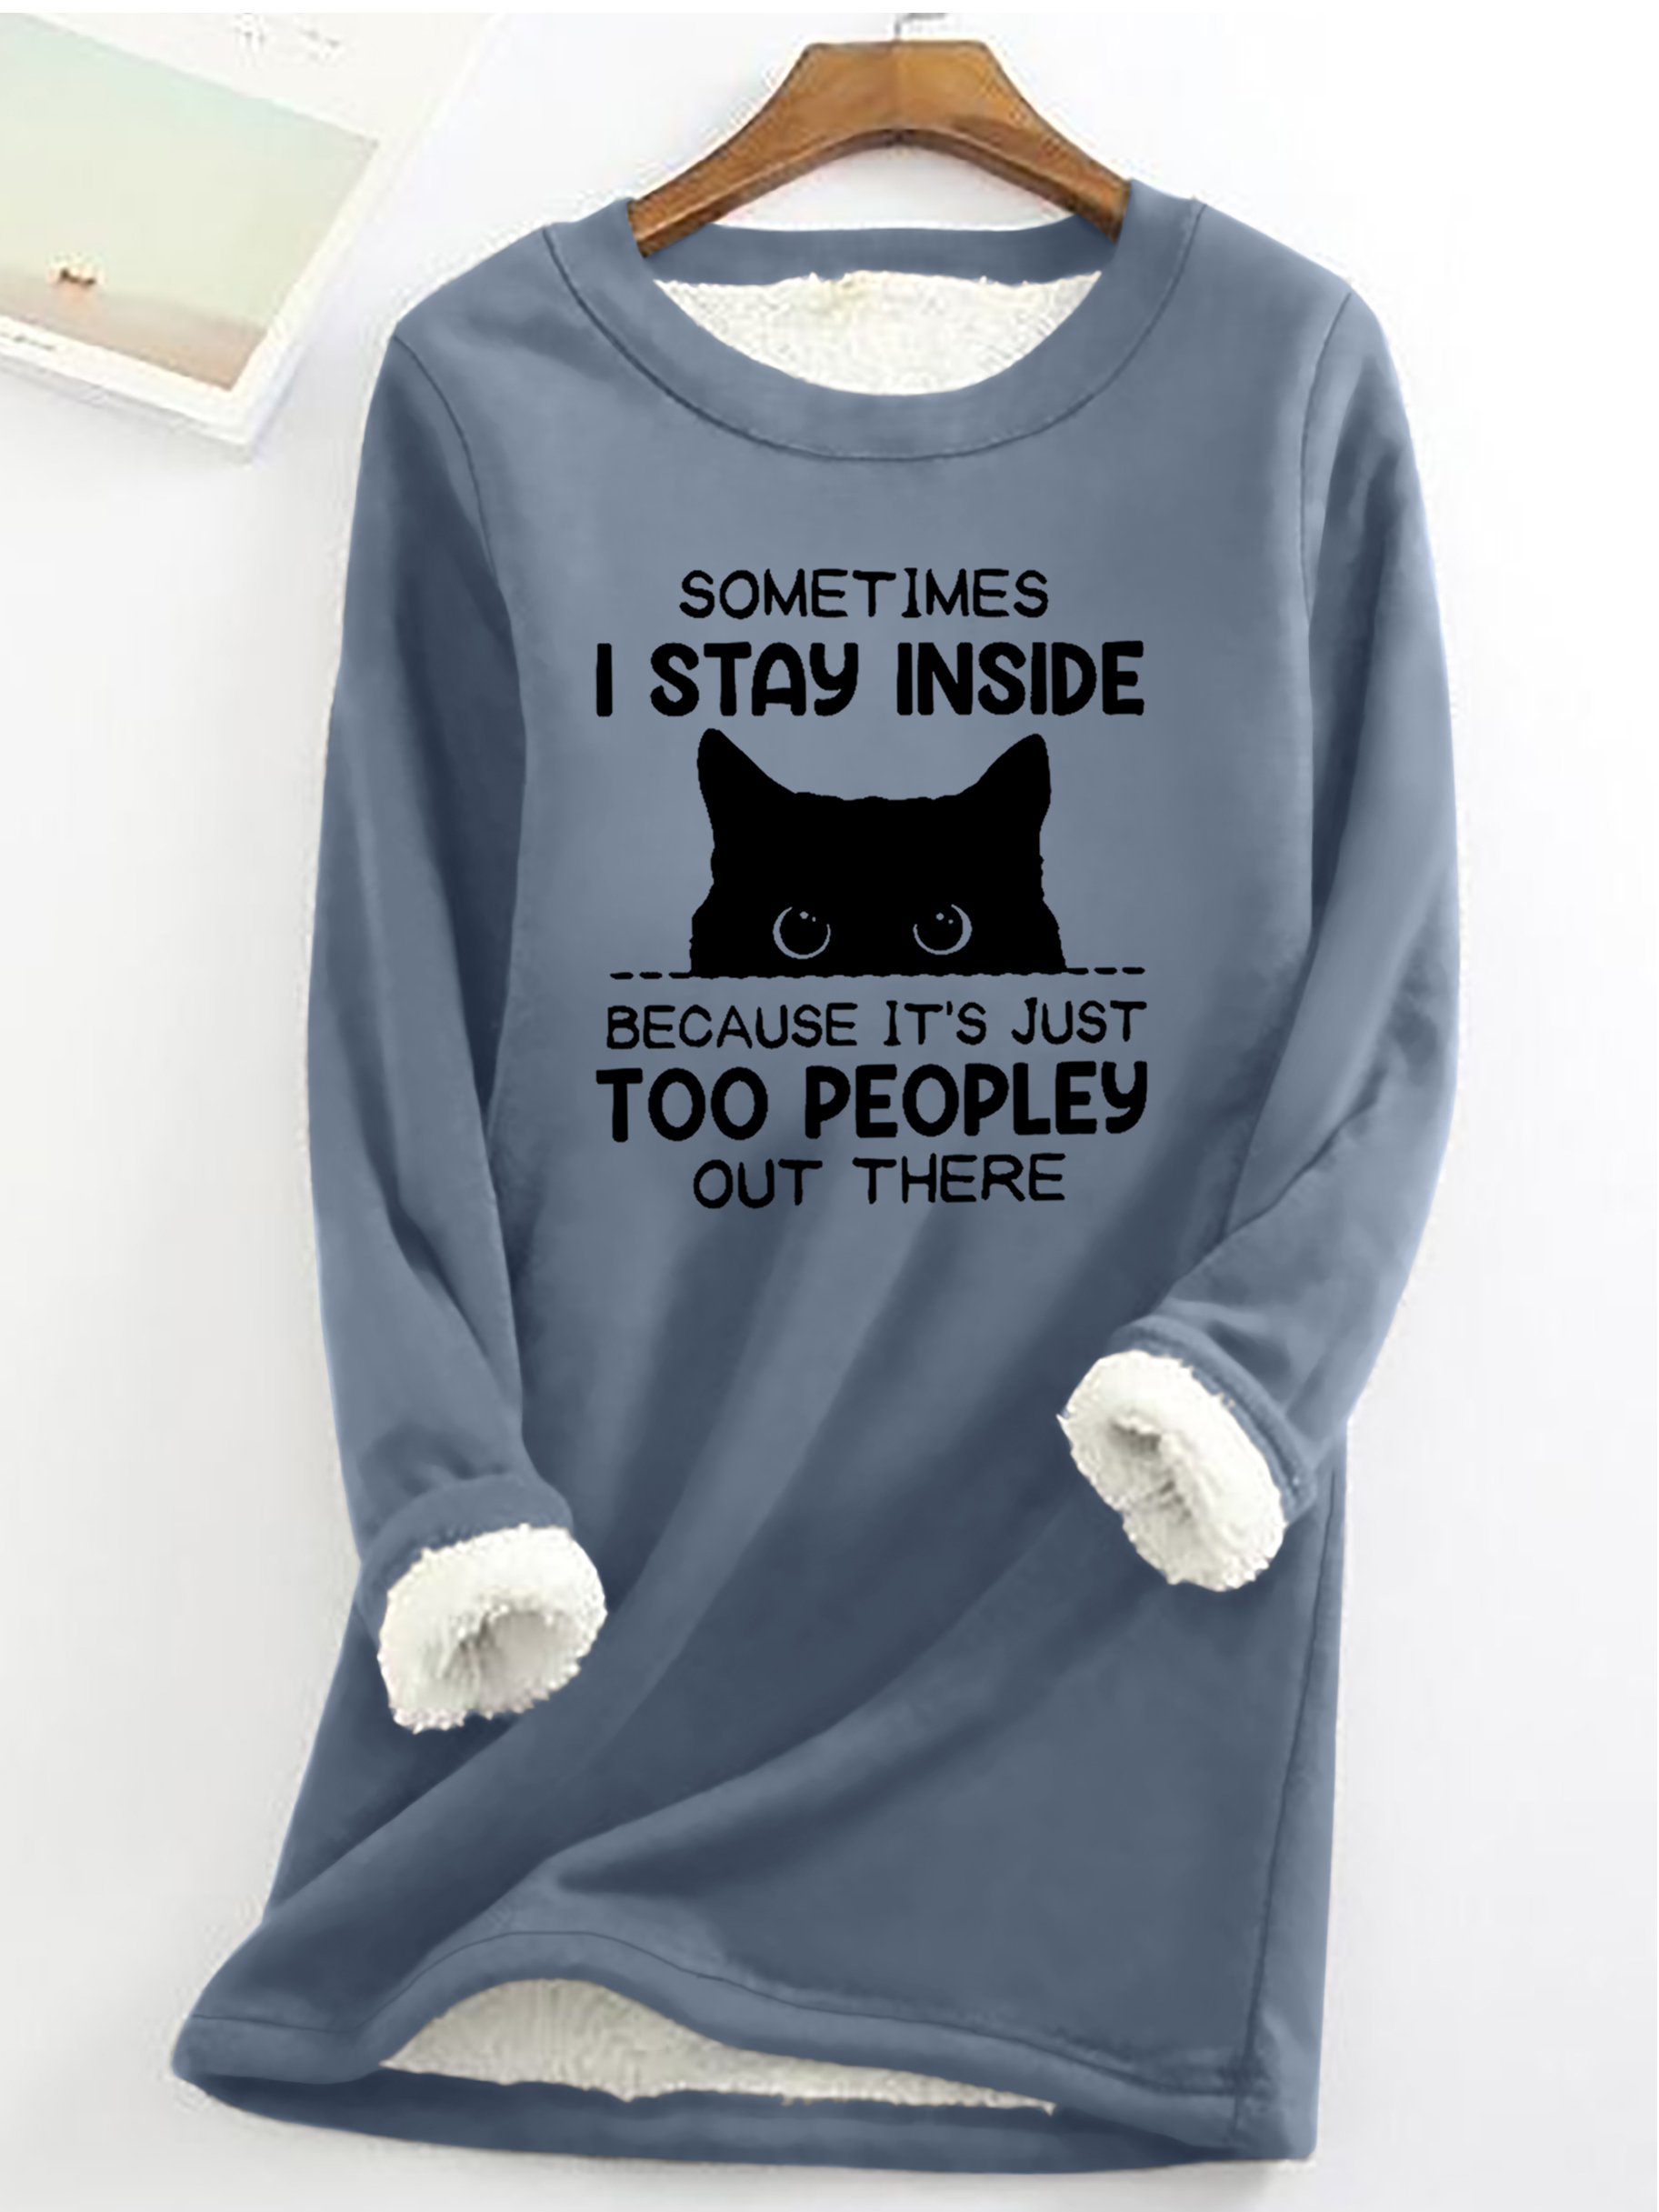 Funny Women's Sometimes I Stay Inside Because It's Just Too People Out There Warmth Fleece Sweatshirt